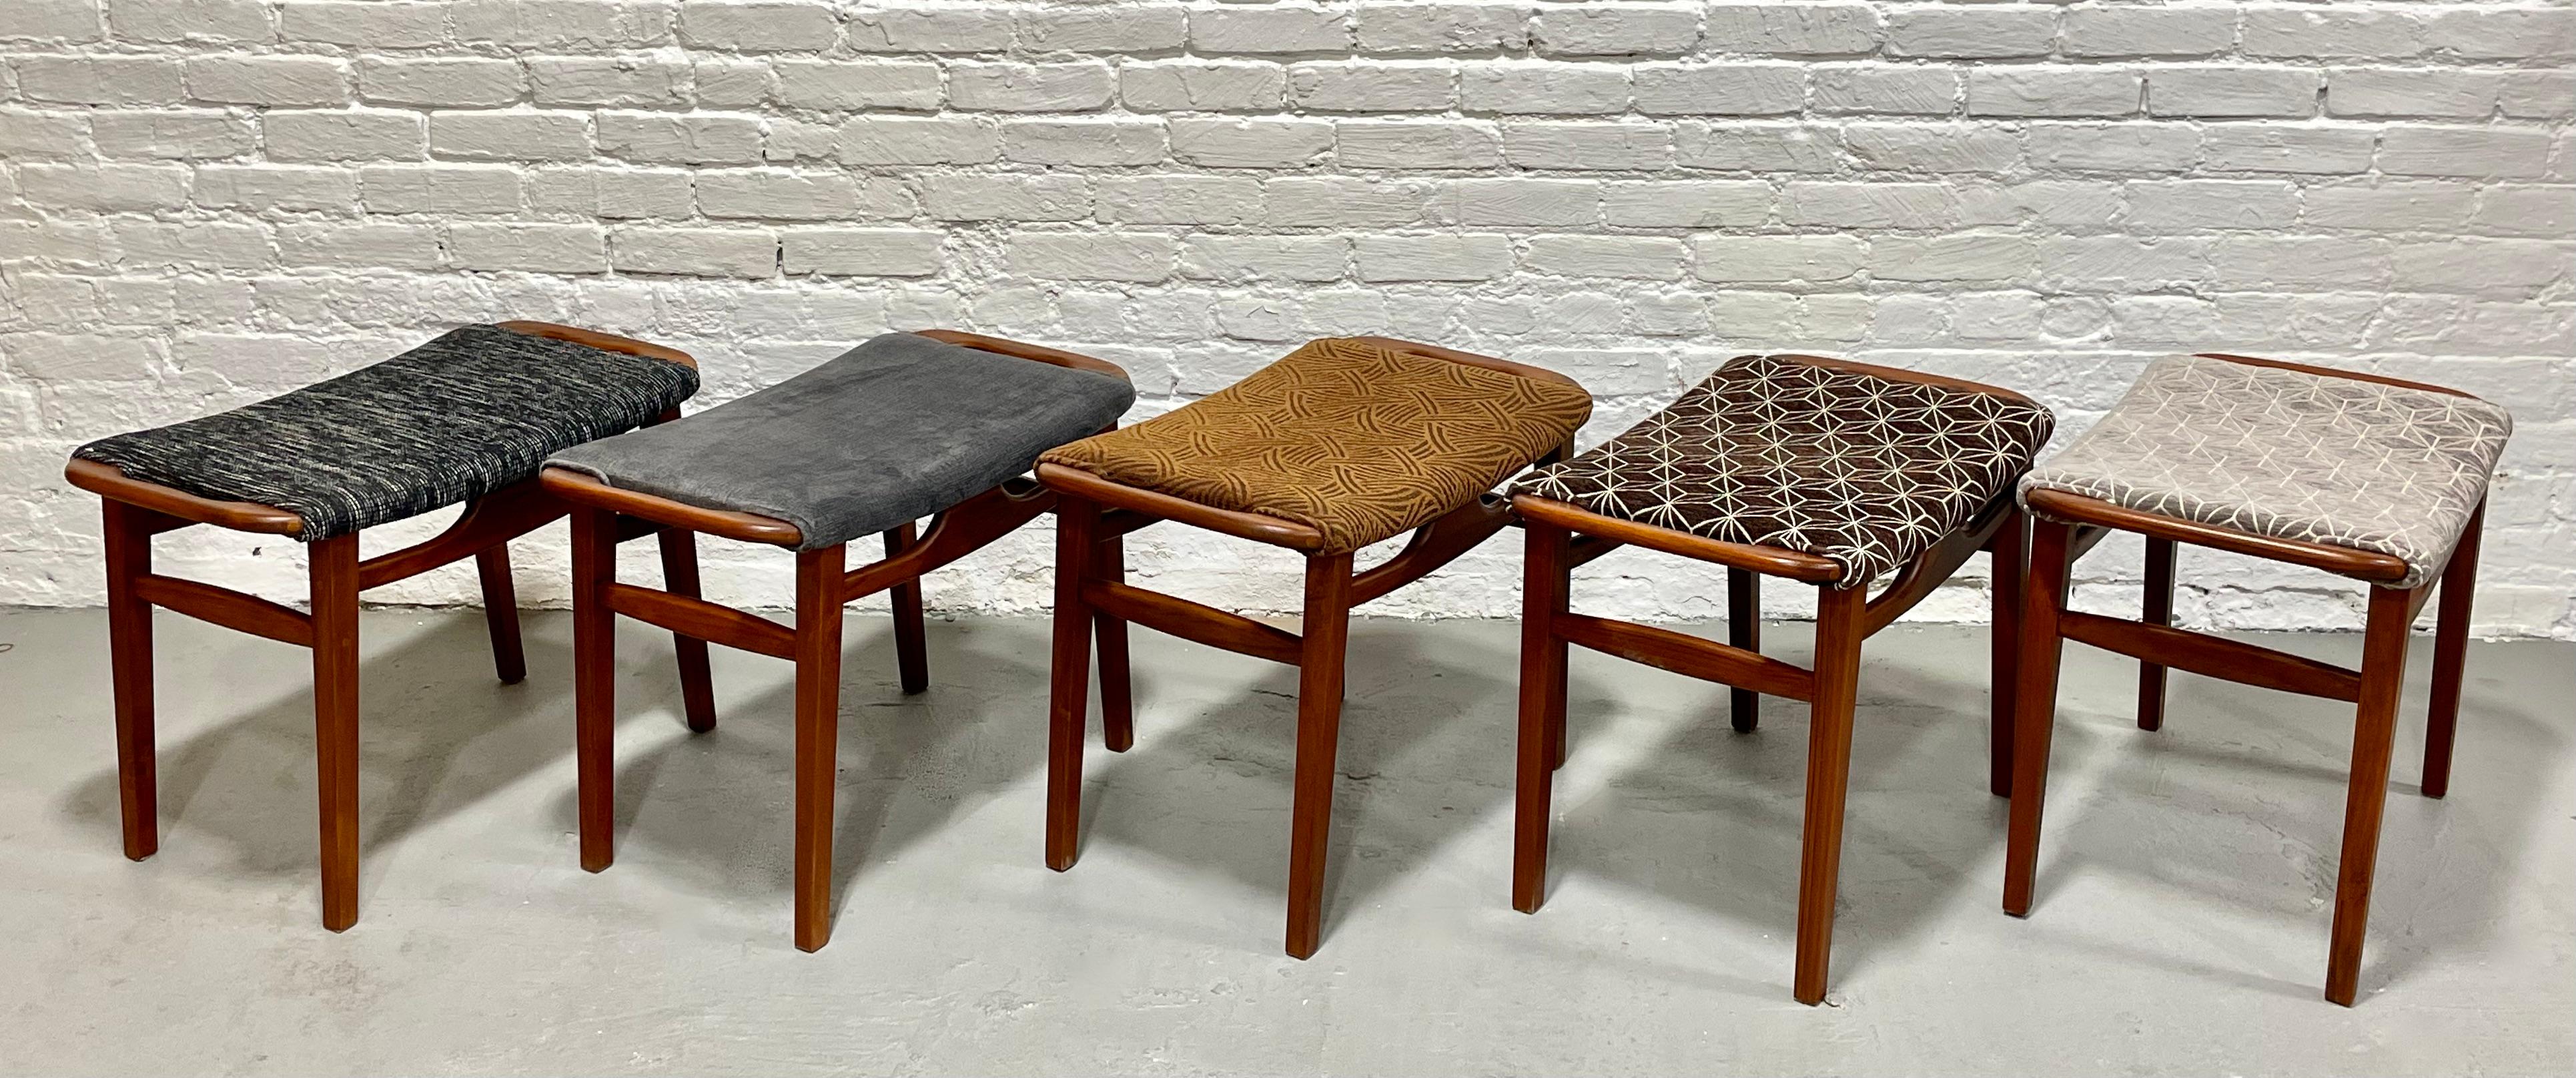 Handcrafted Mid Century Modern styled Ottoman / Footstool, available in 5 pattern / color options. Handmade from solid reclaimed teak.  The gorgeous fabric contrasts nicely with the solid teak wood legs and frame. Perfect as a footstool to your